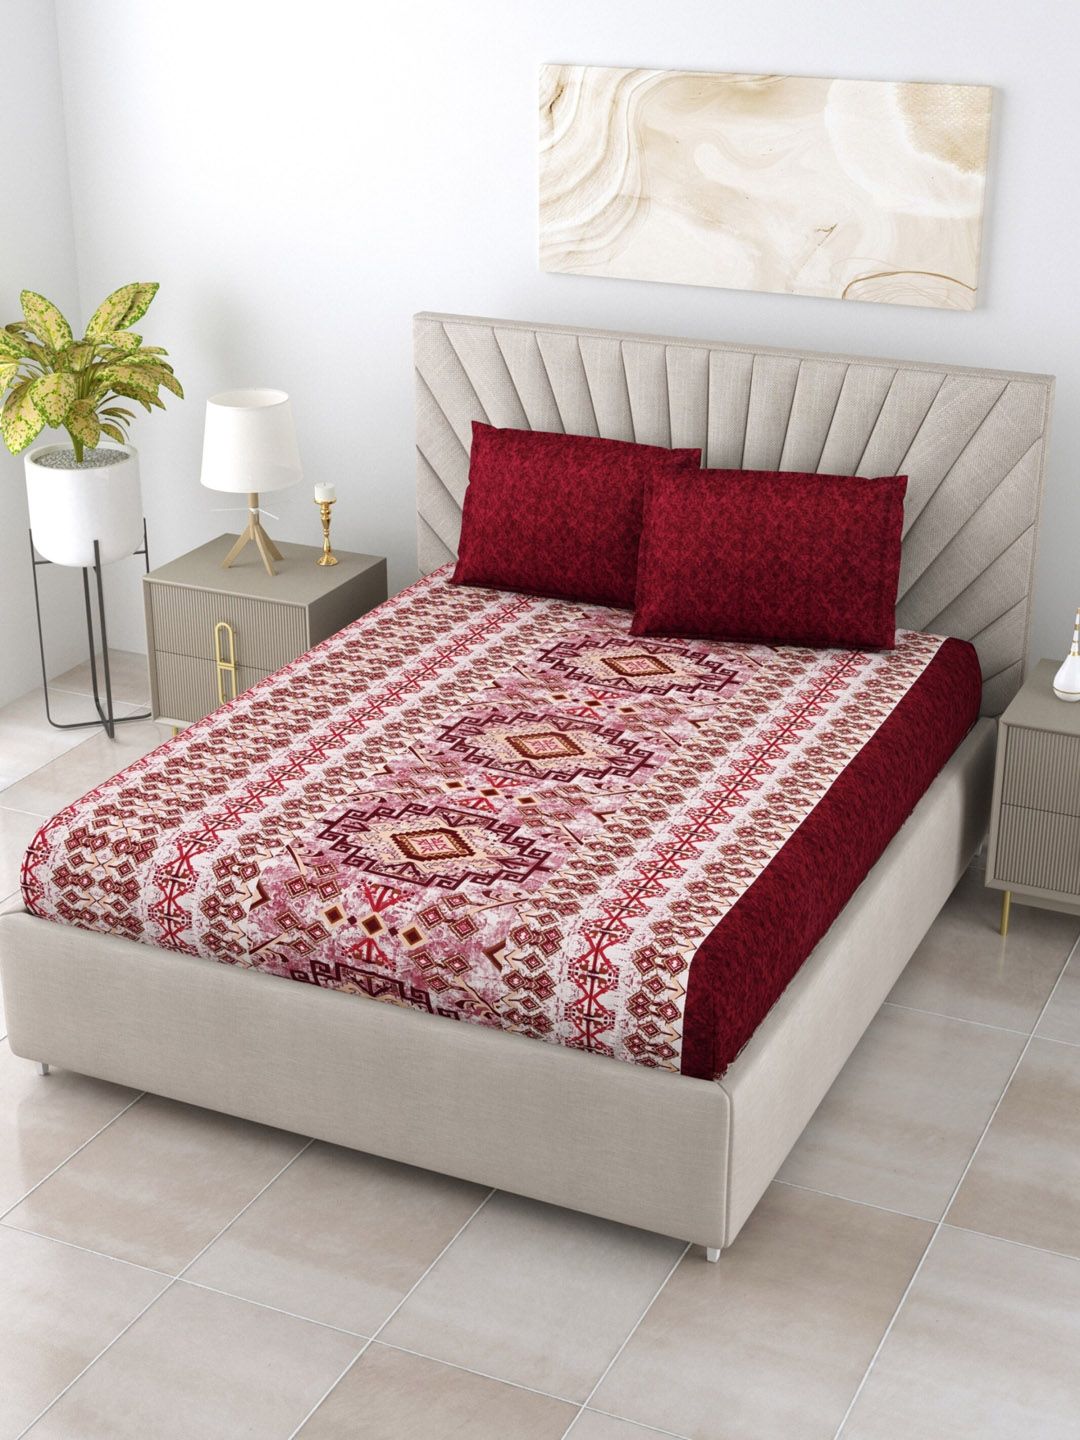 Salona Bichona Ethnic Motifs 120 TC 100% Cotton Queen Bedsheet with 2 Pillow Covers Price in India